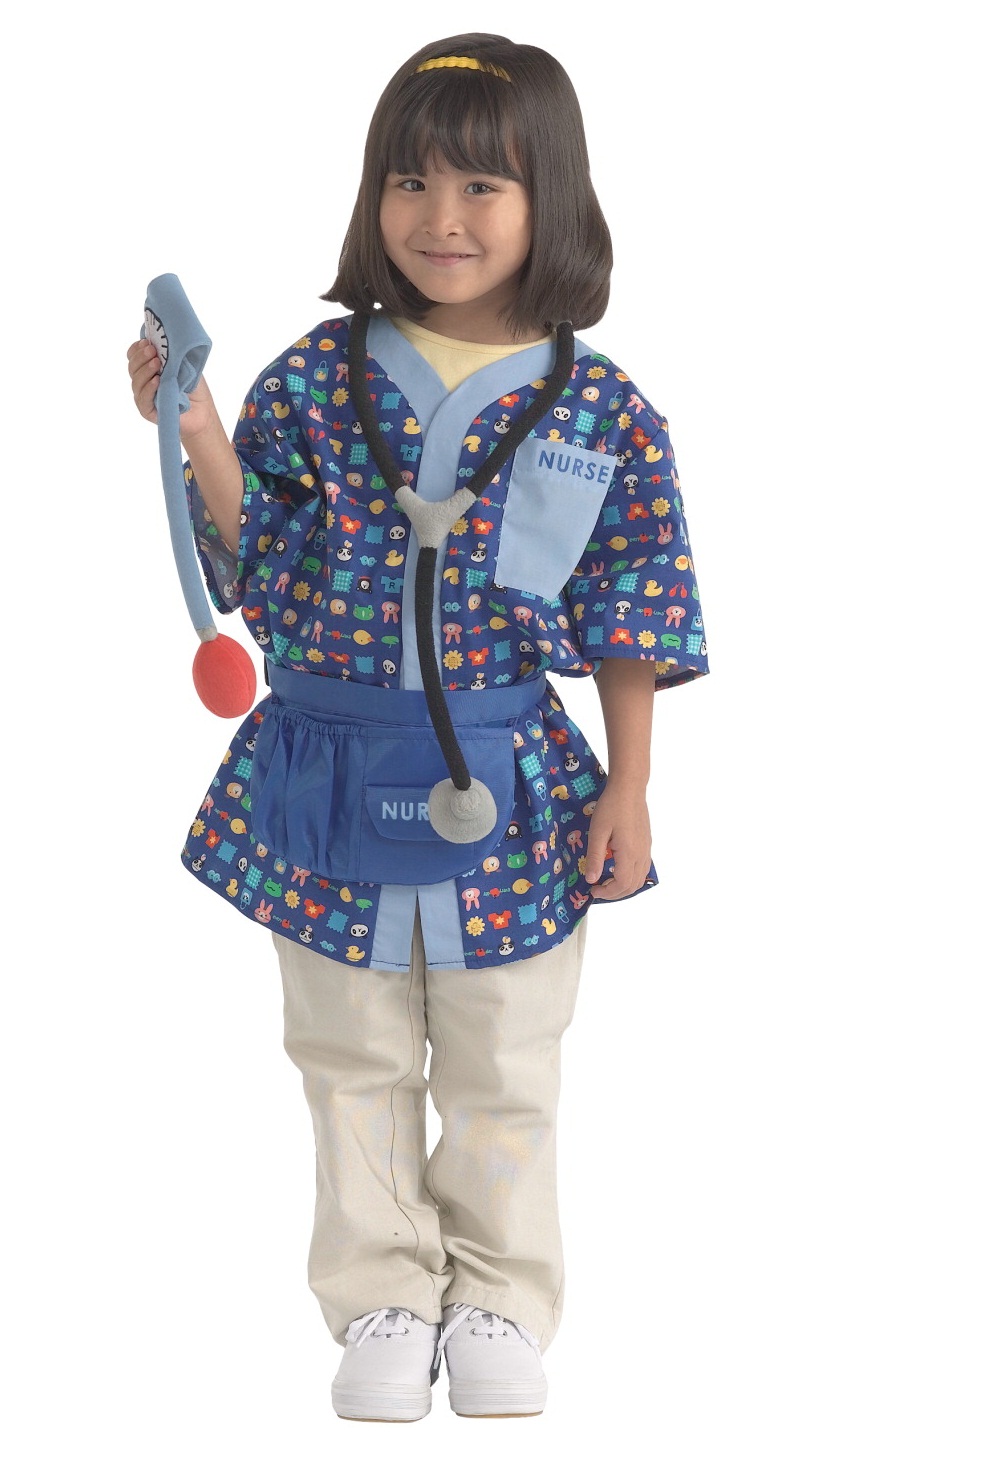 Nurse Carrier Costume With Stethoscope